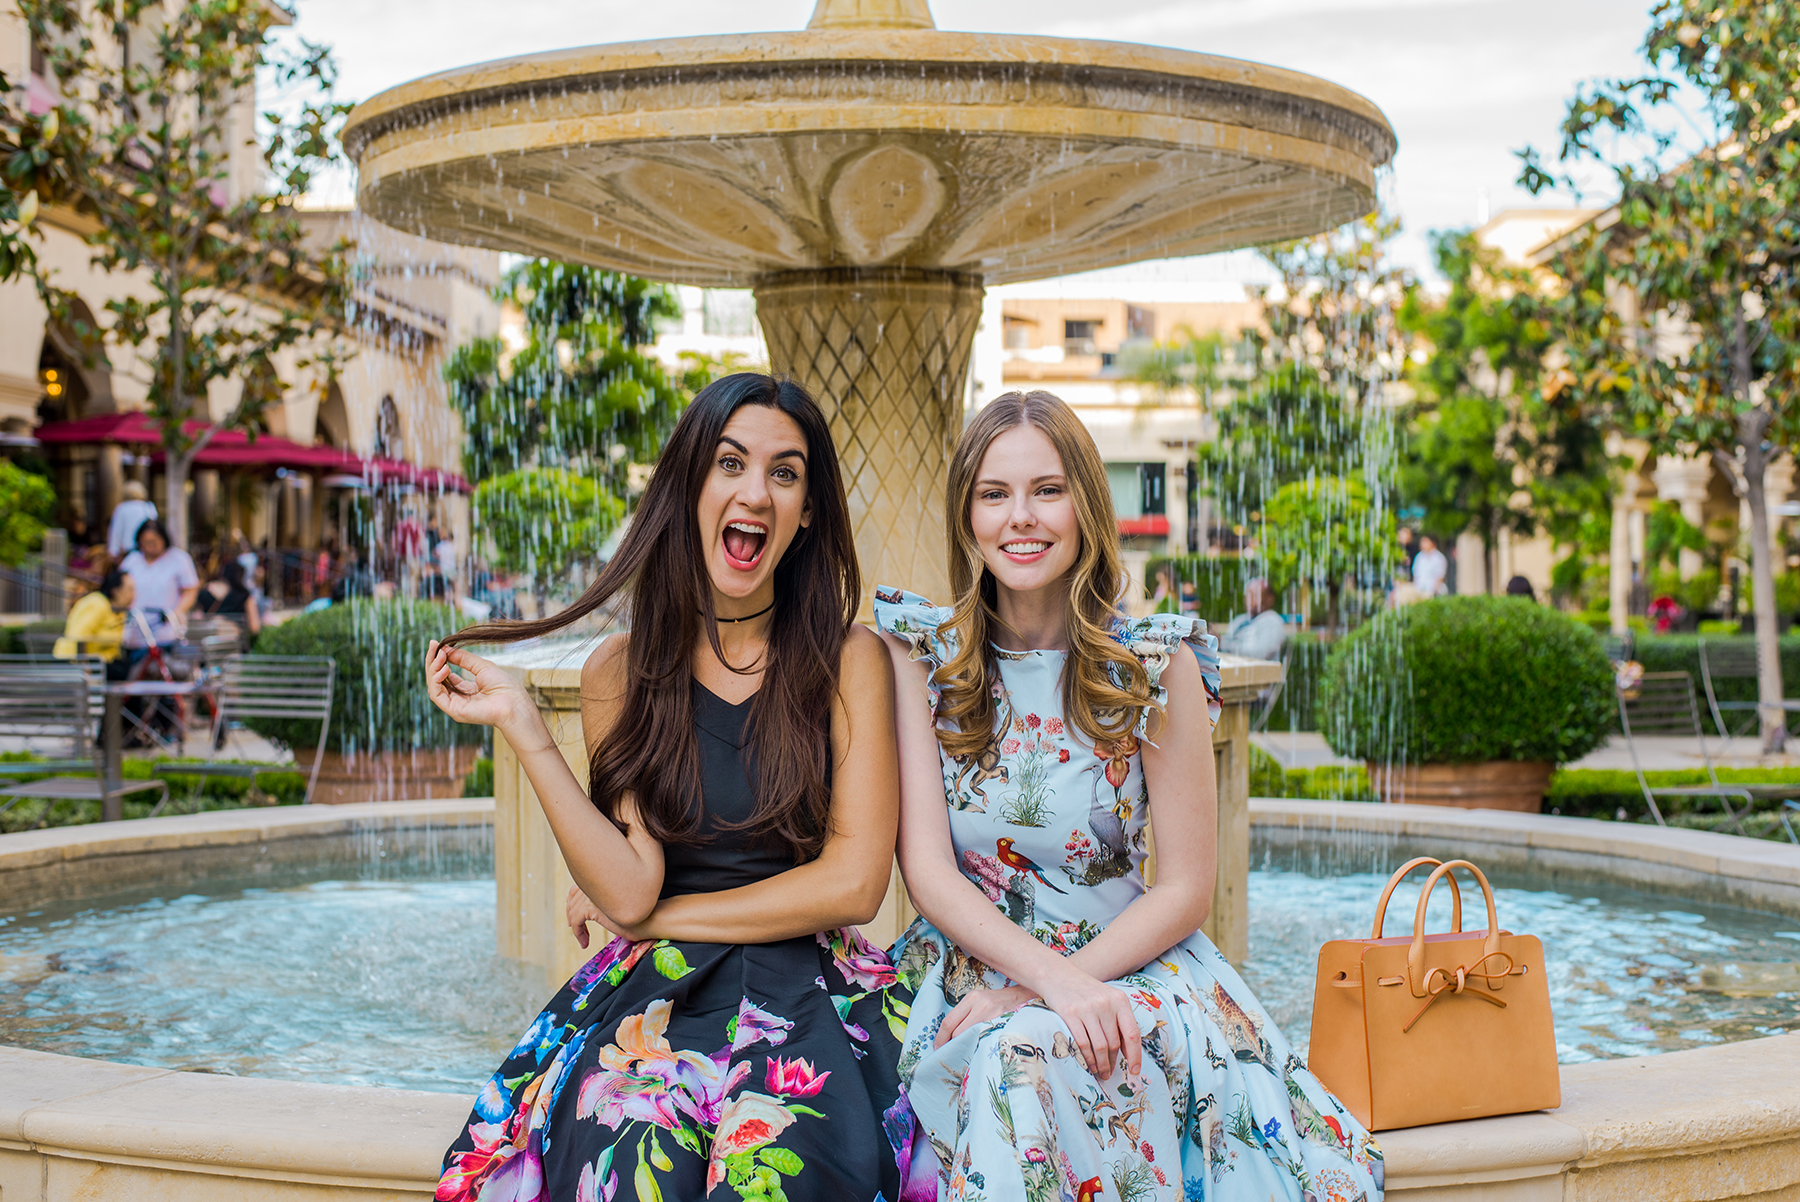 Miss USA 2011 Alyssa Campanella of The A List blog and Natalie Zfat of The Social Co have a girls day out in Beverly Hills